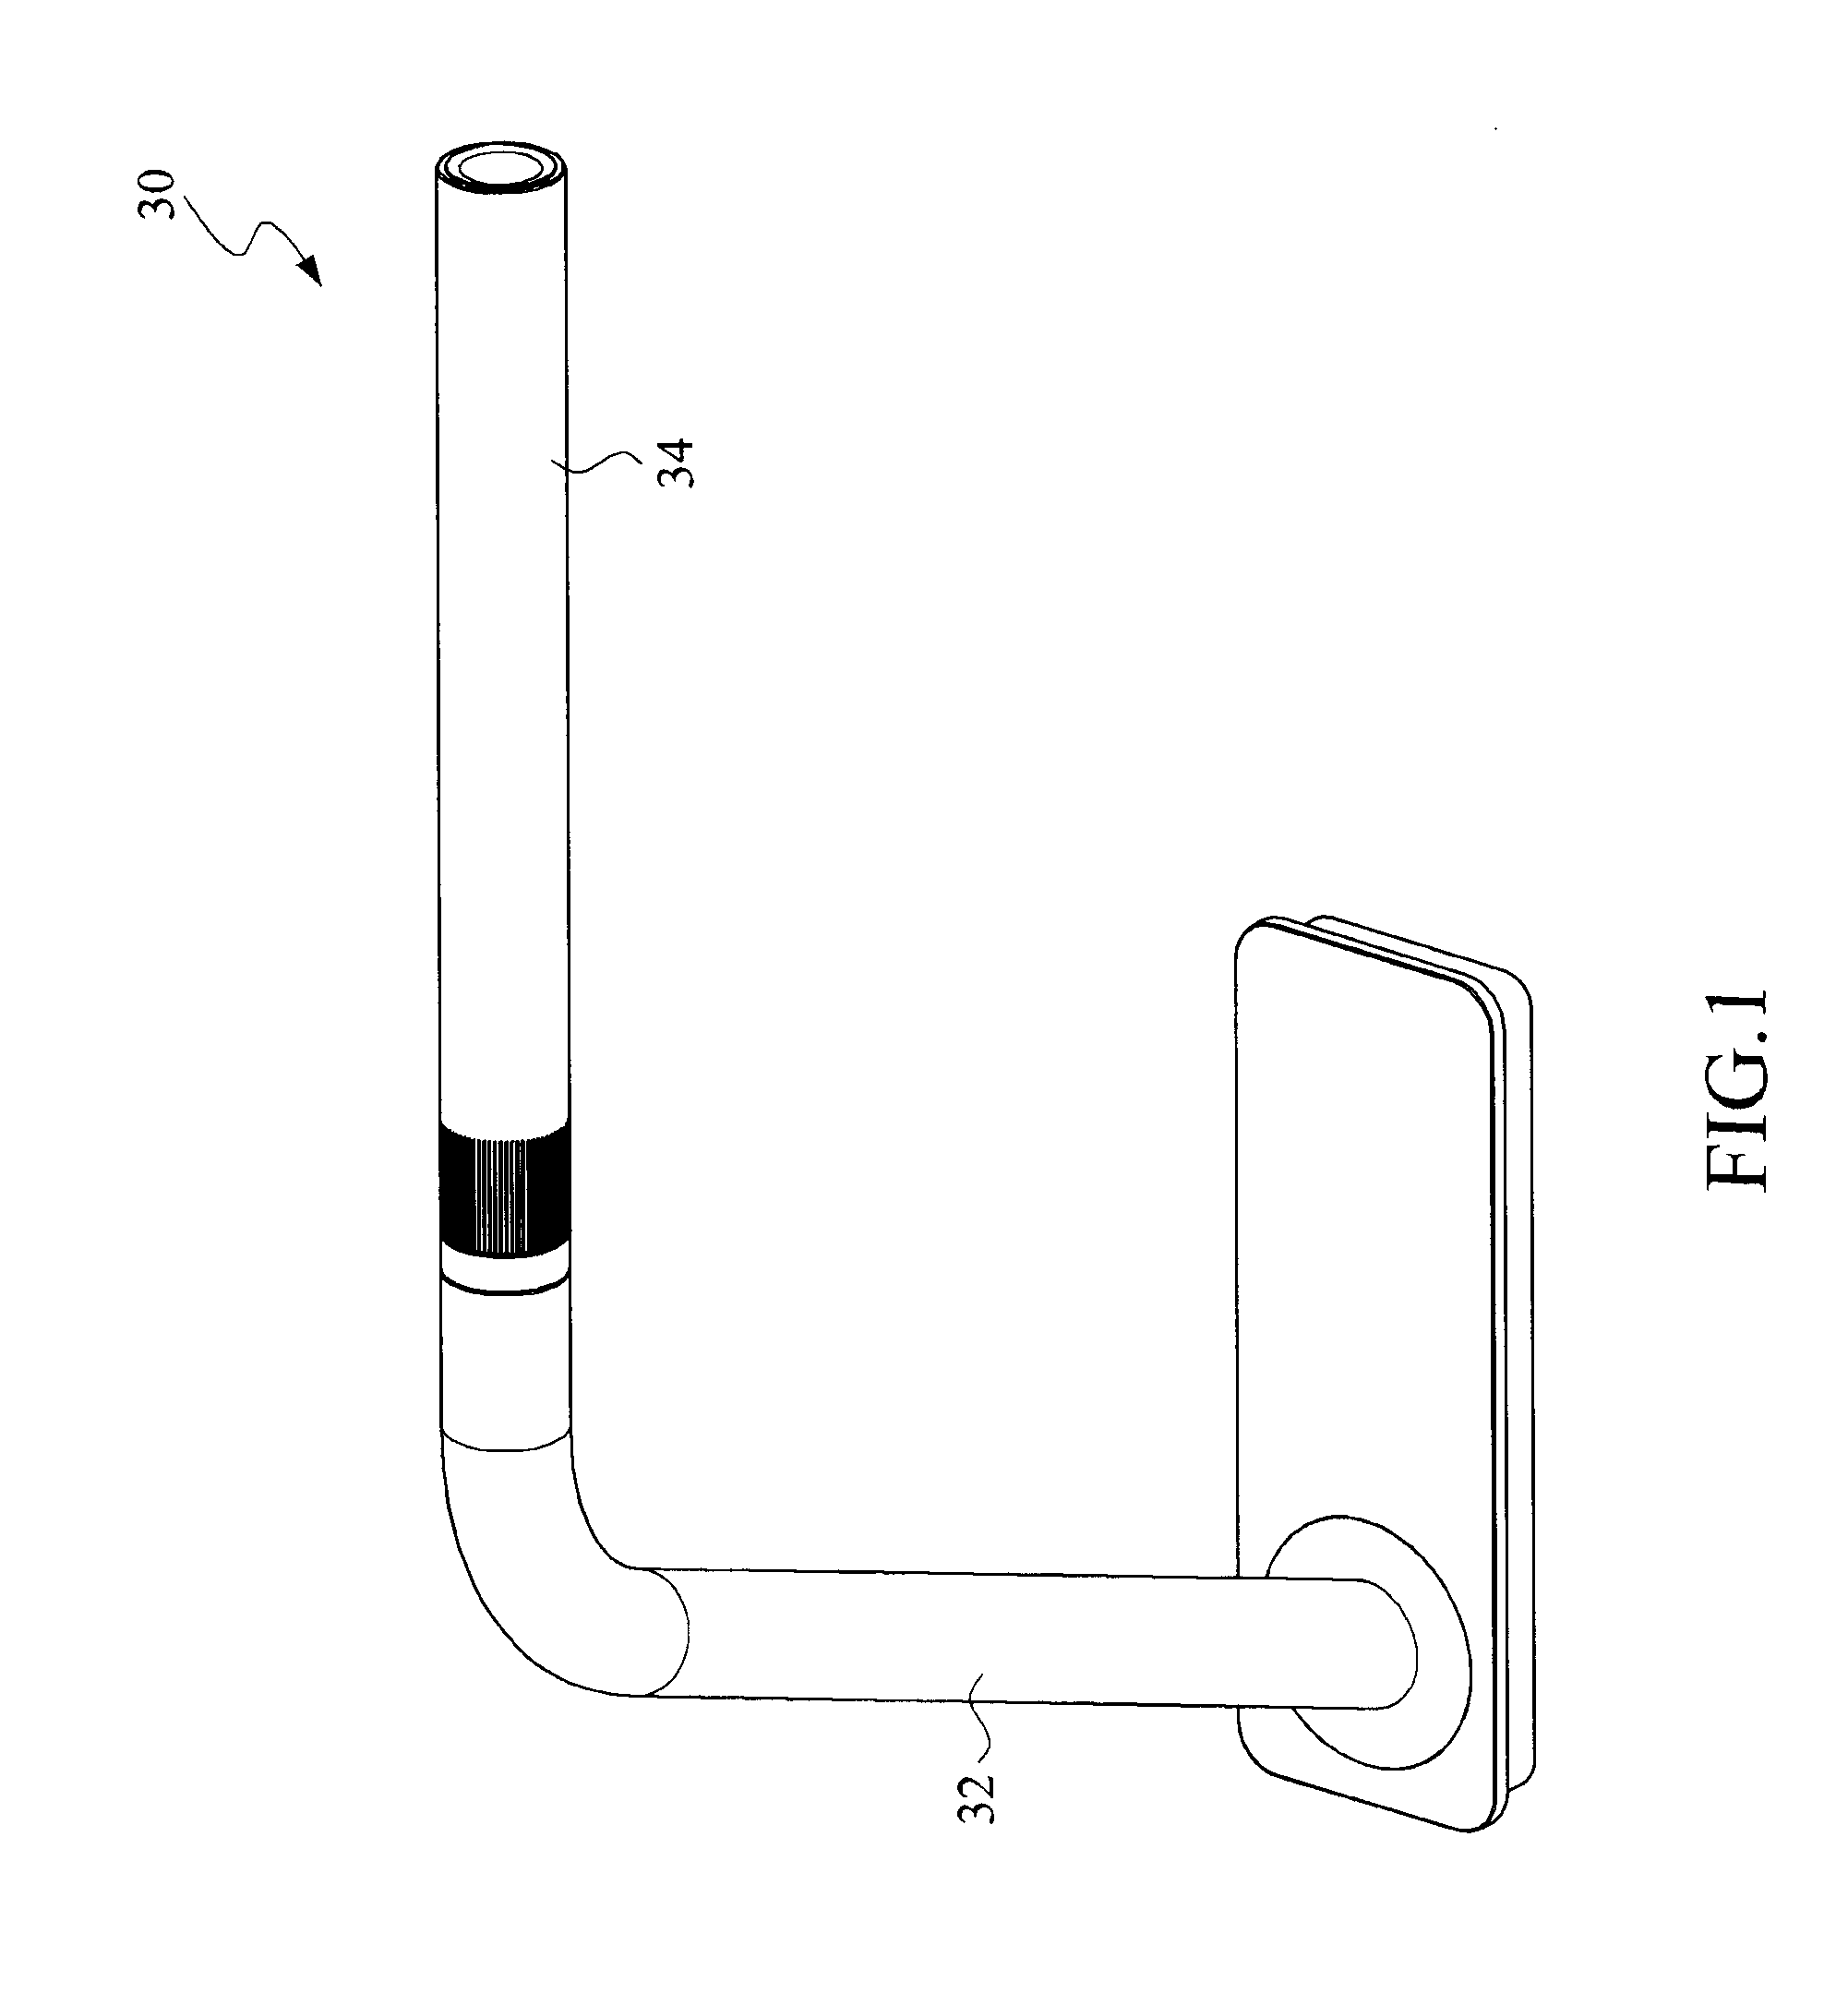 Lamp assembly including a lamp device detachable from a stand unit for serving as a torch light